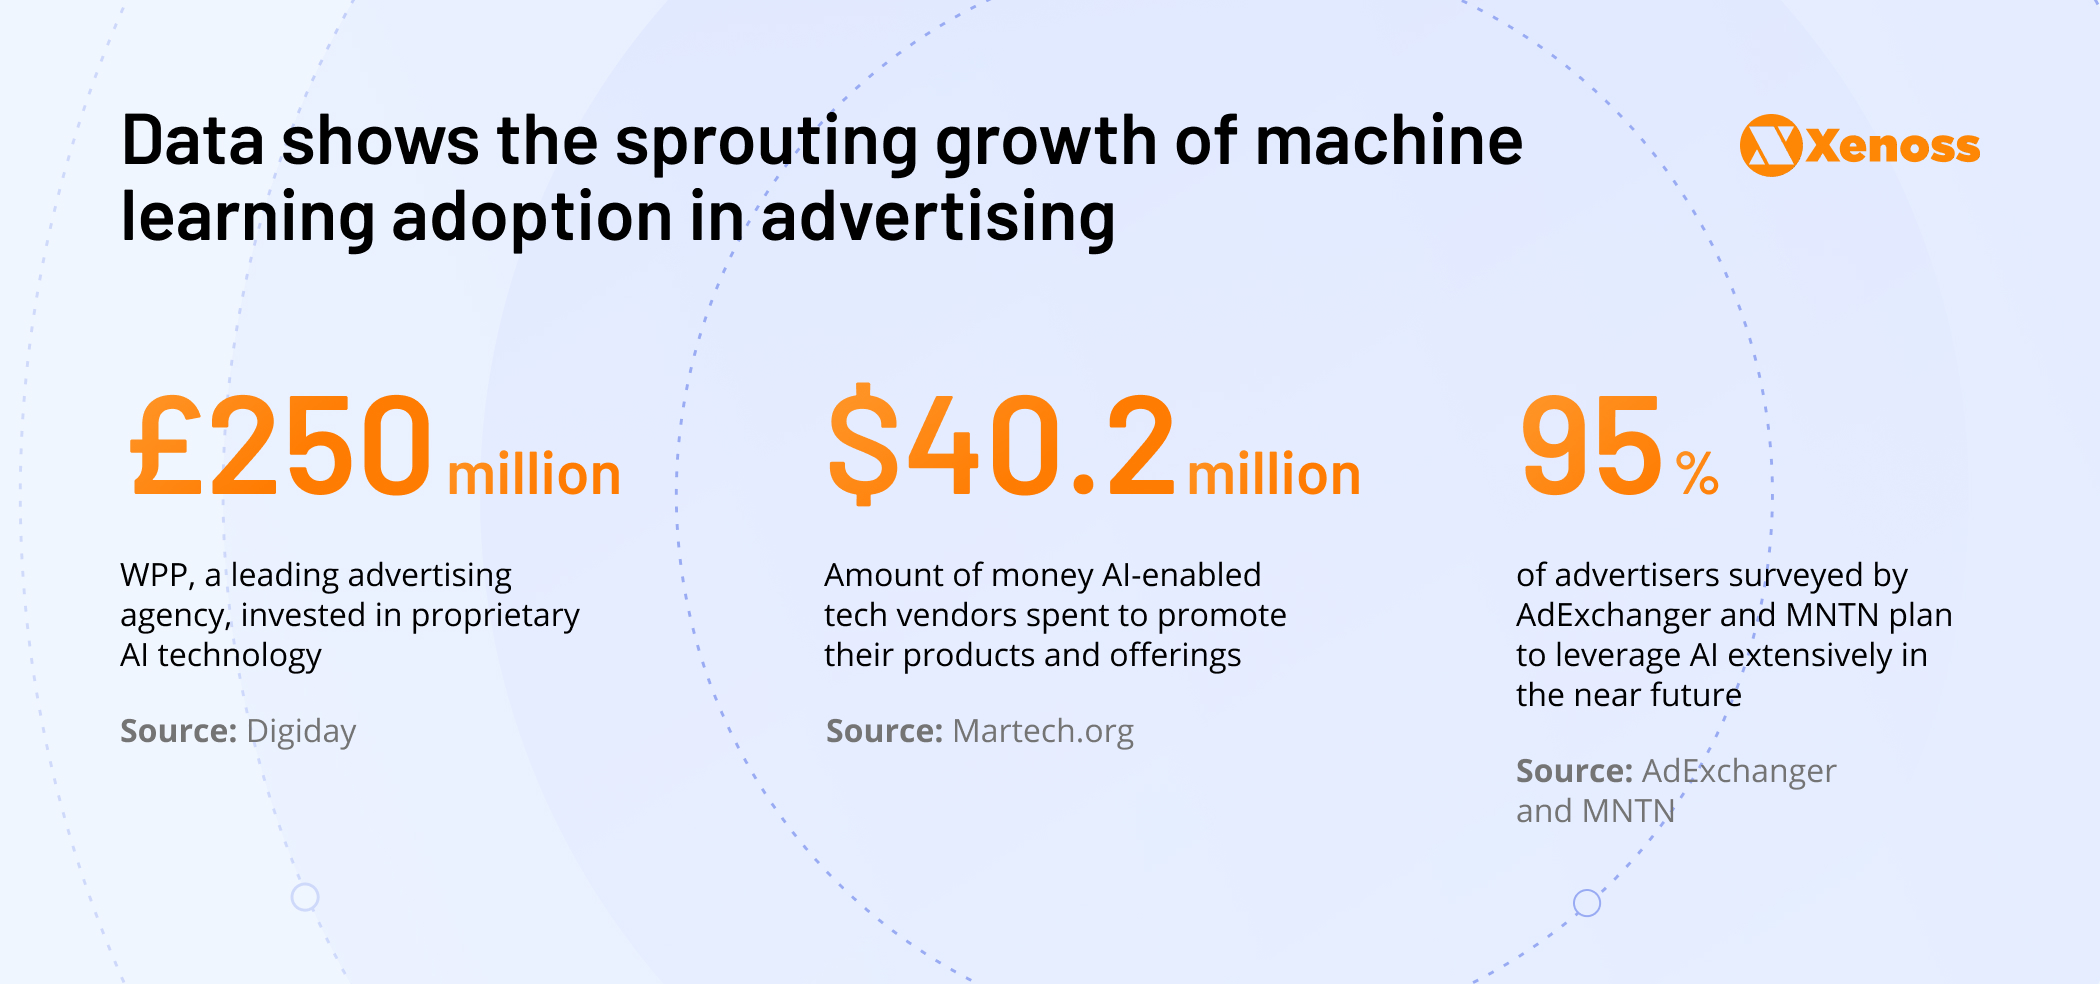 Infographic depicting the influence of AI and machine learning in AdTech innovation and marketing strategies